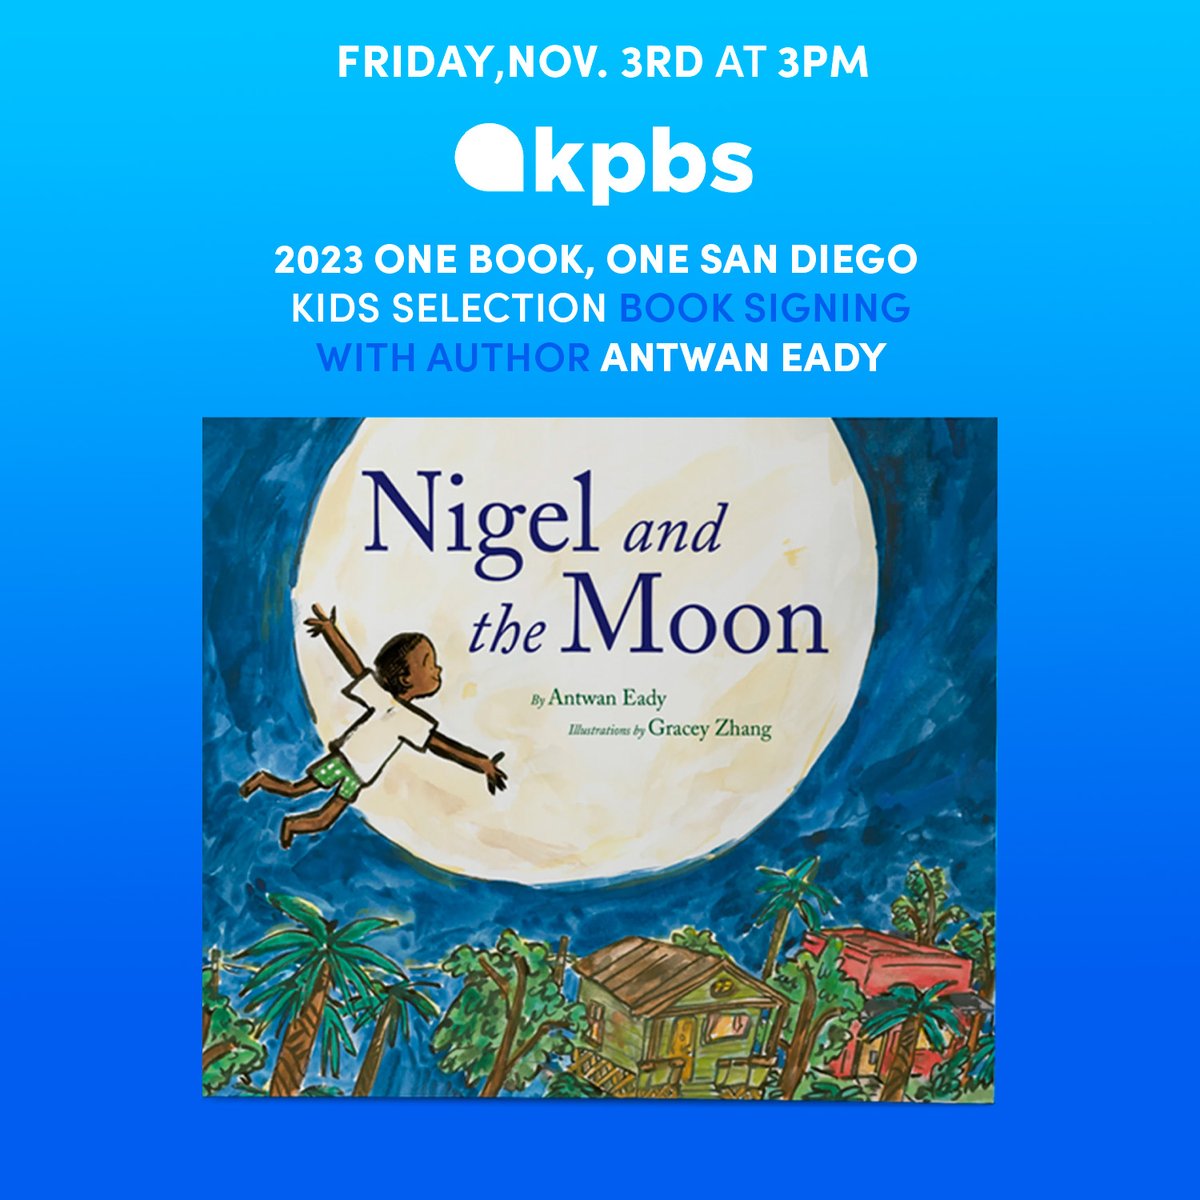 Calling all book enthusiasts! Join us, KPBS, and our esteemed community partners on Friday, November 3, at 3 p.m. for a special live event featuring Antwan Eady, the talented author of our 2023 One Book, One San Diego kids selection, 'Nigel and the Moon.' sandiegoairandspace.org/nigelandthemoon